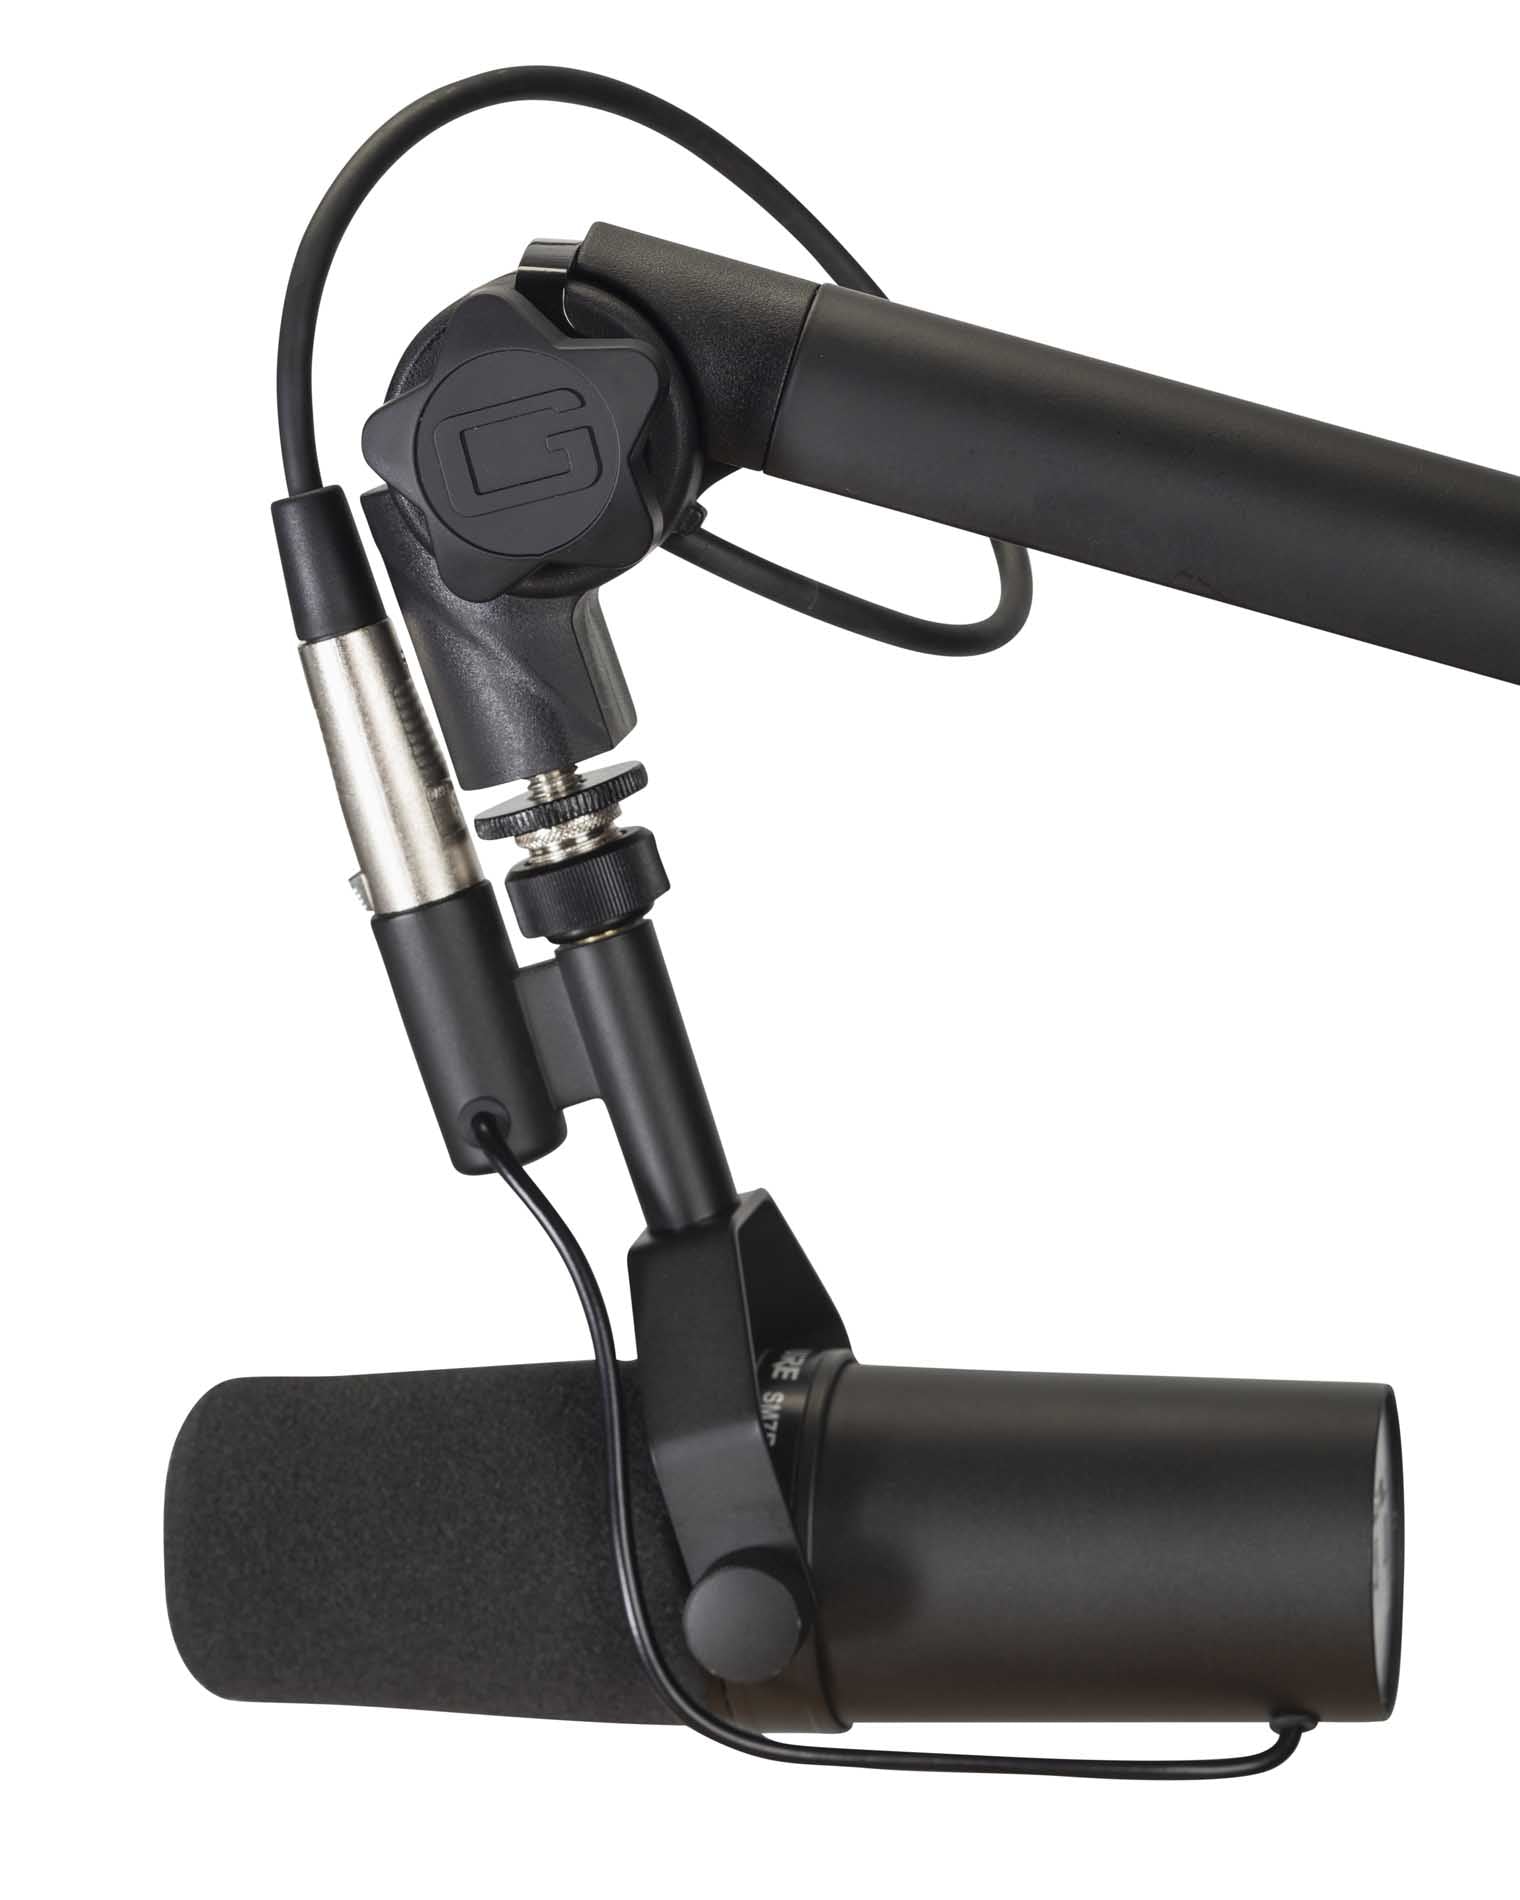 Gator Frameworks GFWMICBCBM3000 Deluxe Desktop Mic Boom Stand For Podcasts and Recording - Hollywood DJ